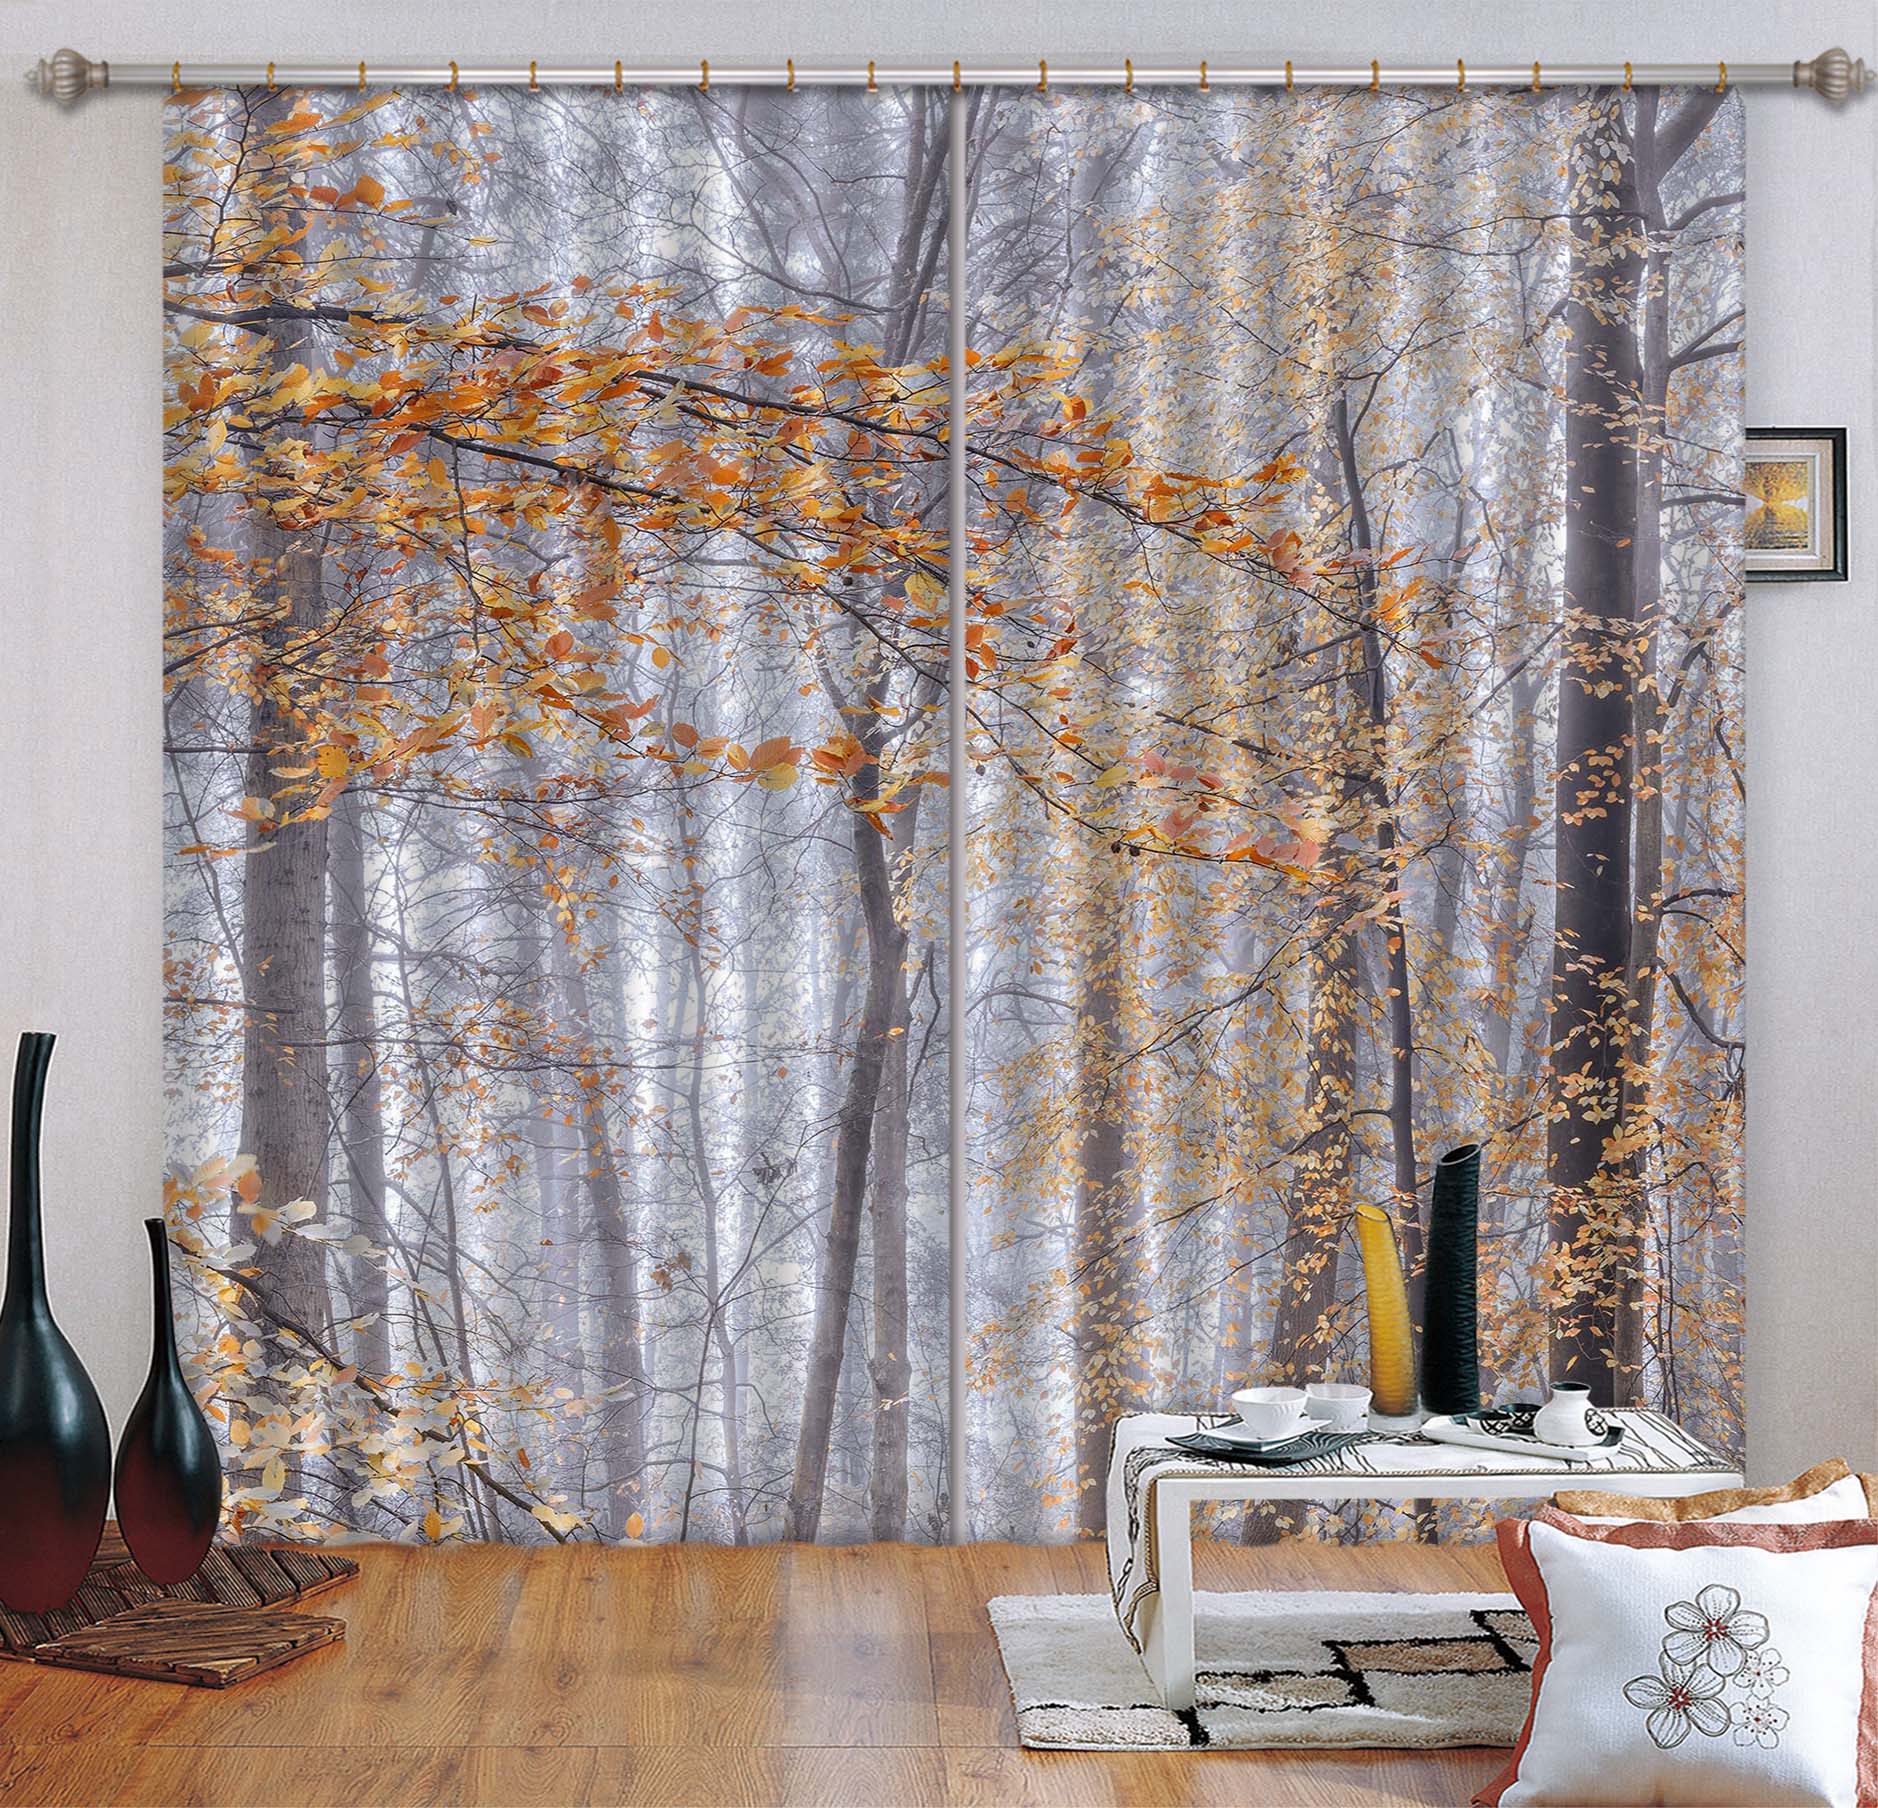 3D Yellow Leaves 6354 Assaf Frank Curtain Curtains Drapes